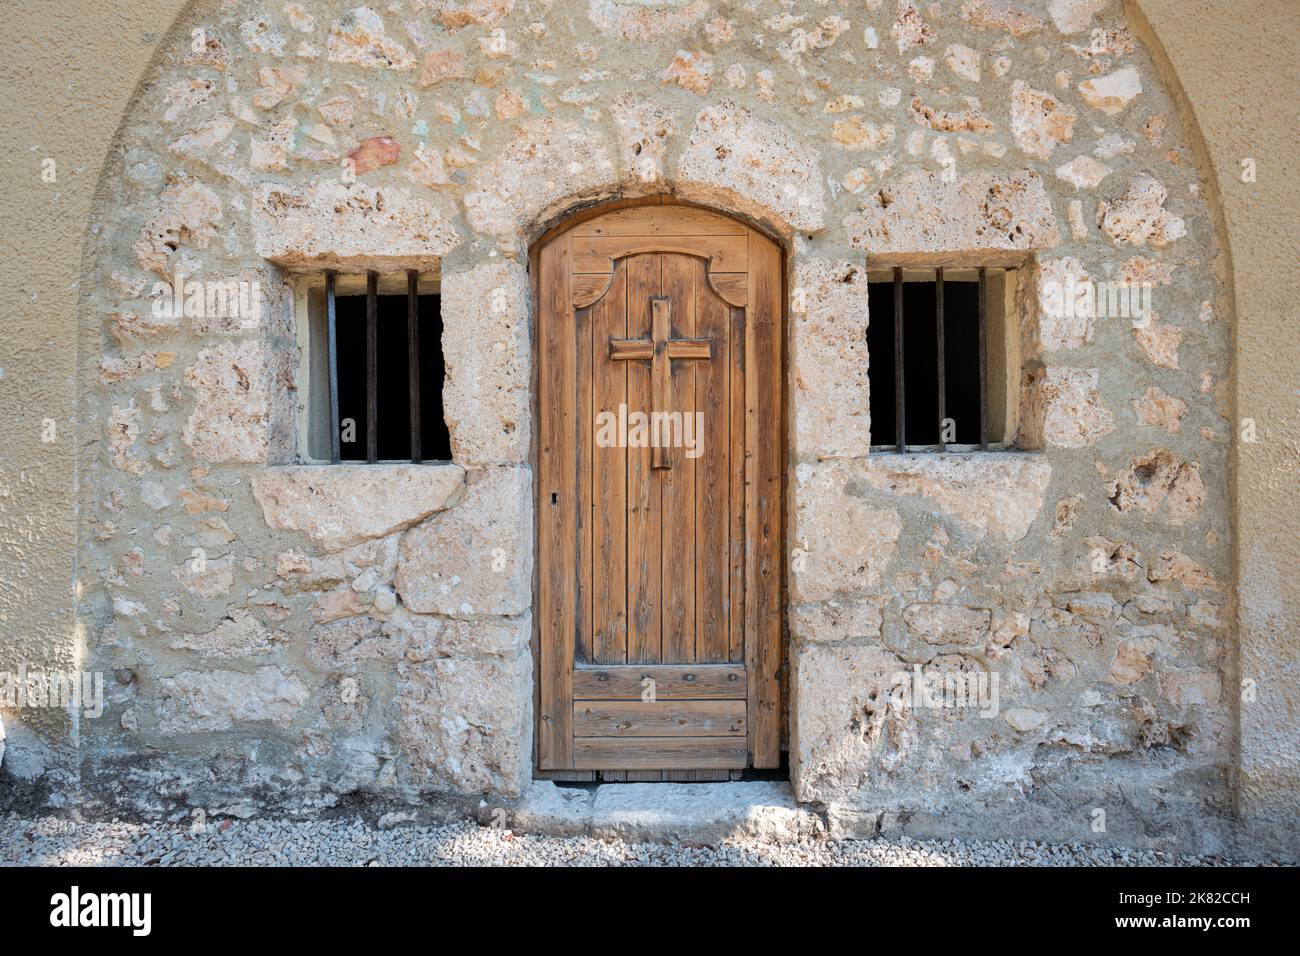 Chapel with a wooden door engraved with a cross, Tourtour, South of France Stock Photo